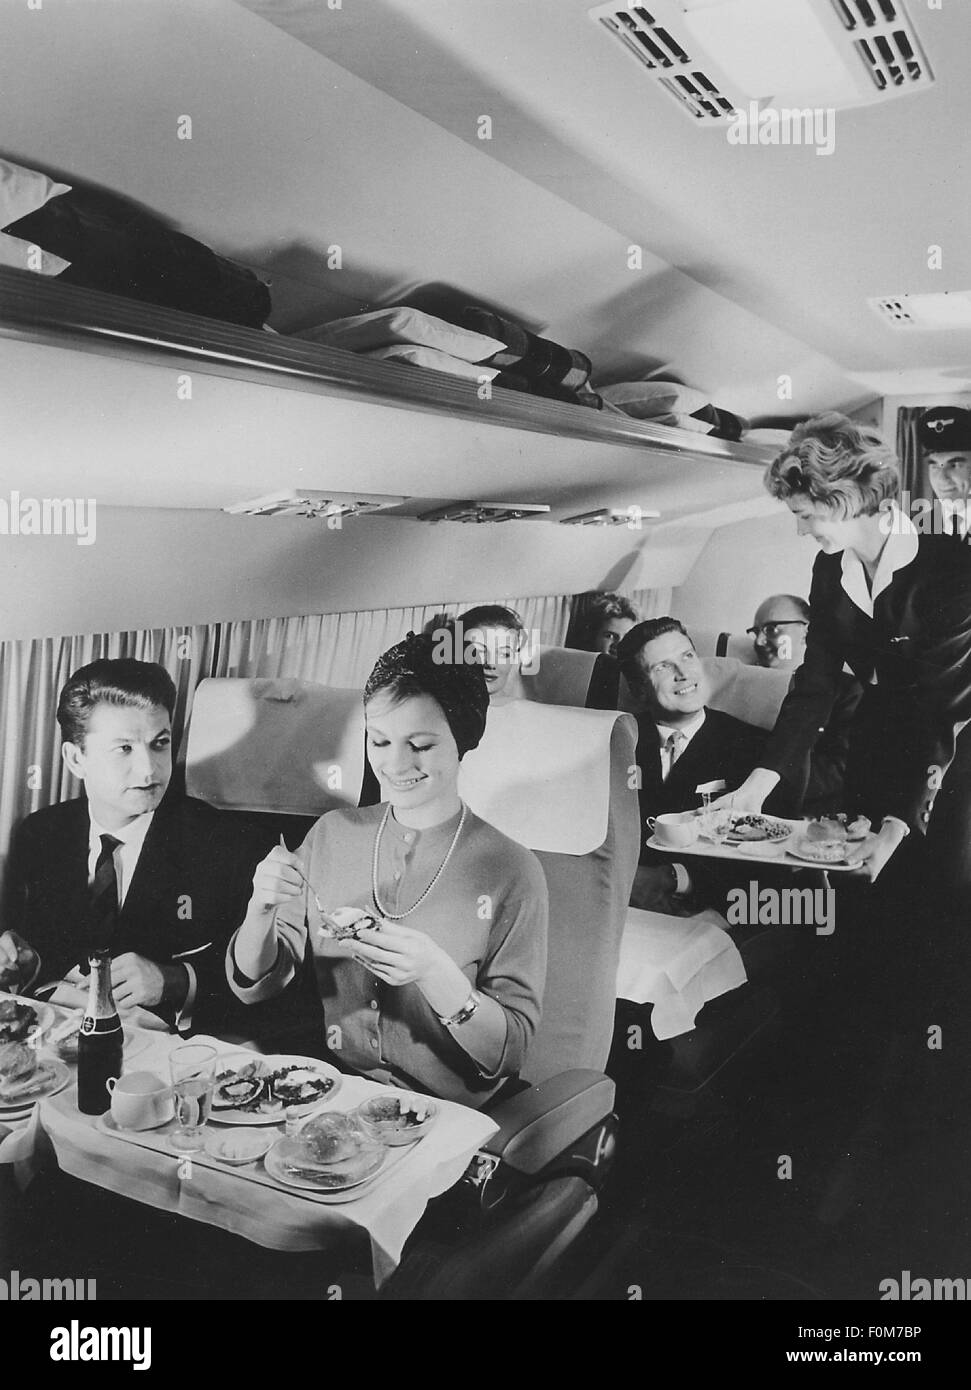 transport / transportation,aviation,passengers,eating passengers,1950s,50s,20th century,historic,historical,Lufthansa,German,stewardess,air hostess,stewardesses,air hostesses,flight attendant,tray,trays,service,servicing,serving,comfort,board,foods,meals,catering,feeding,service,provision of food and drink,cabin,cabins,air passenger,air passengers,bumpee,flight,flights,travel by air,travels by air,travel by air,traveler,traveller,travelers,travellers,travel,travels,flying,passenger planes,passenger plane,airliner,,Additional-Rights-Clearences-Not Available Stock Photo